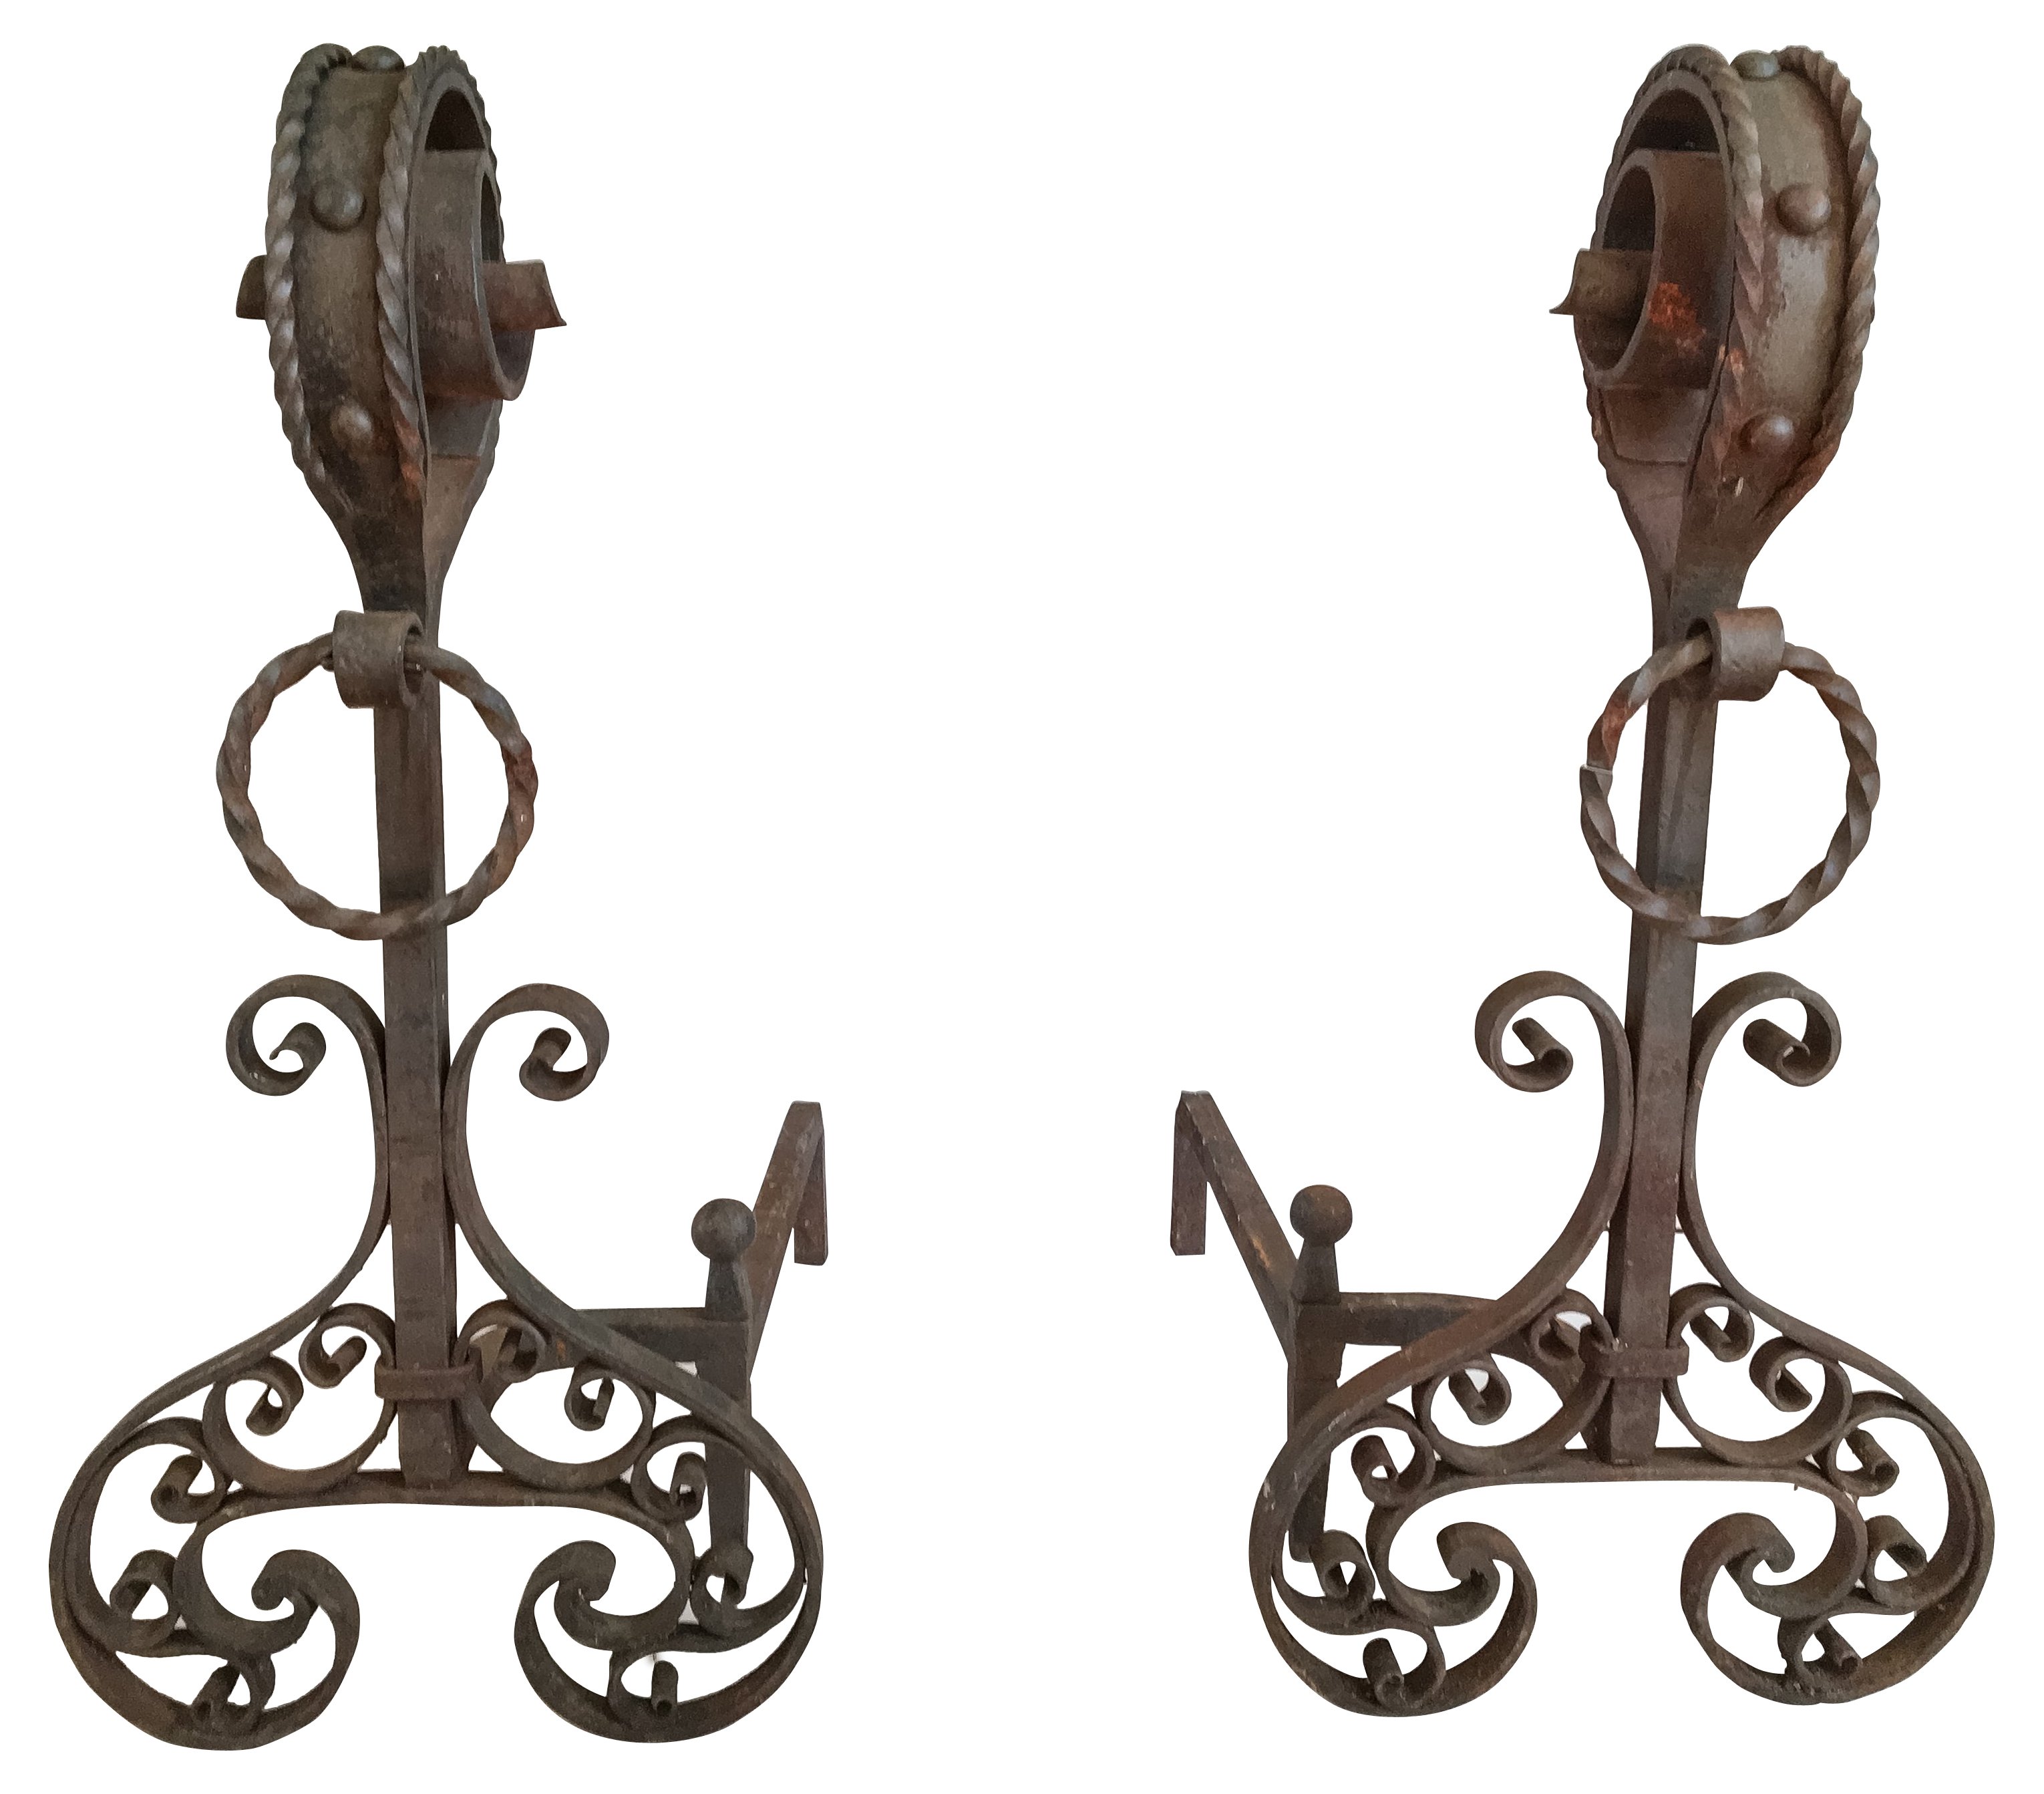 19th-C. French Andirons, Pair~P77334943